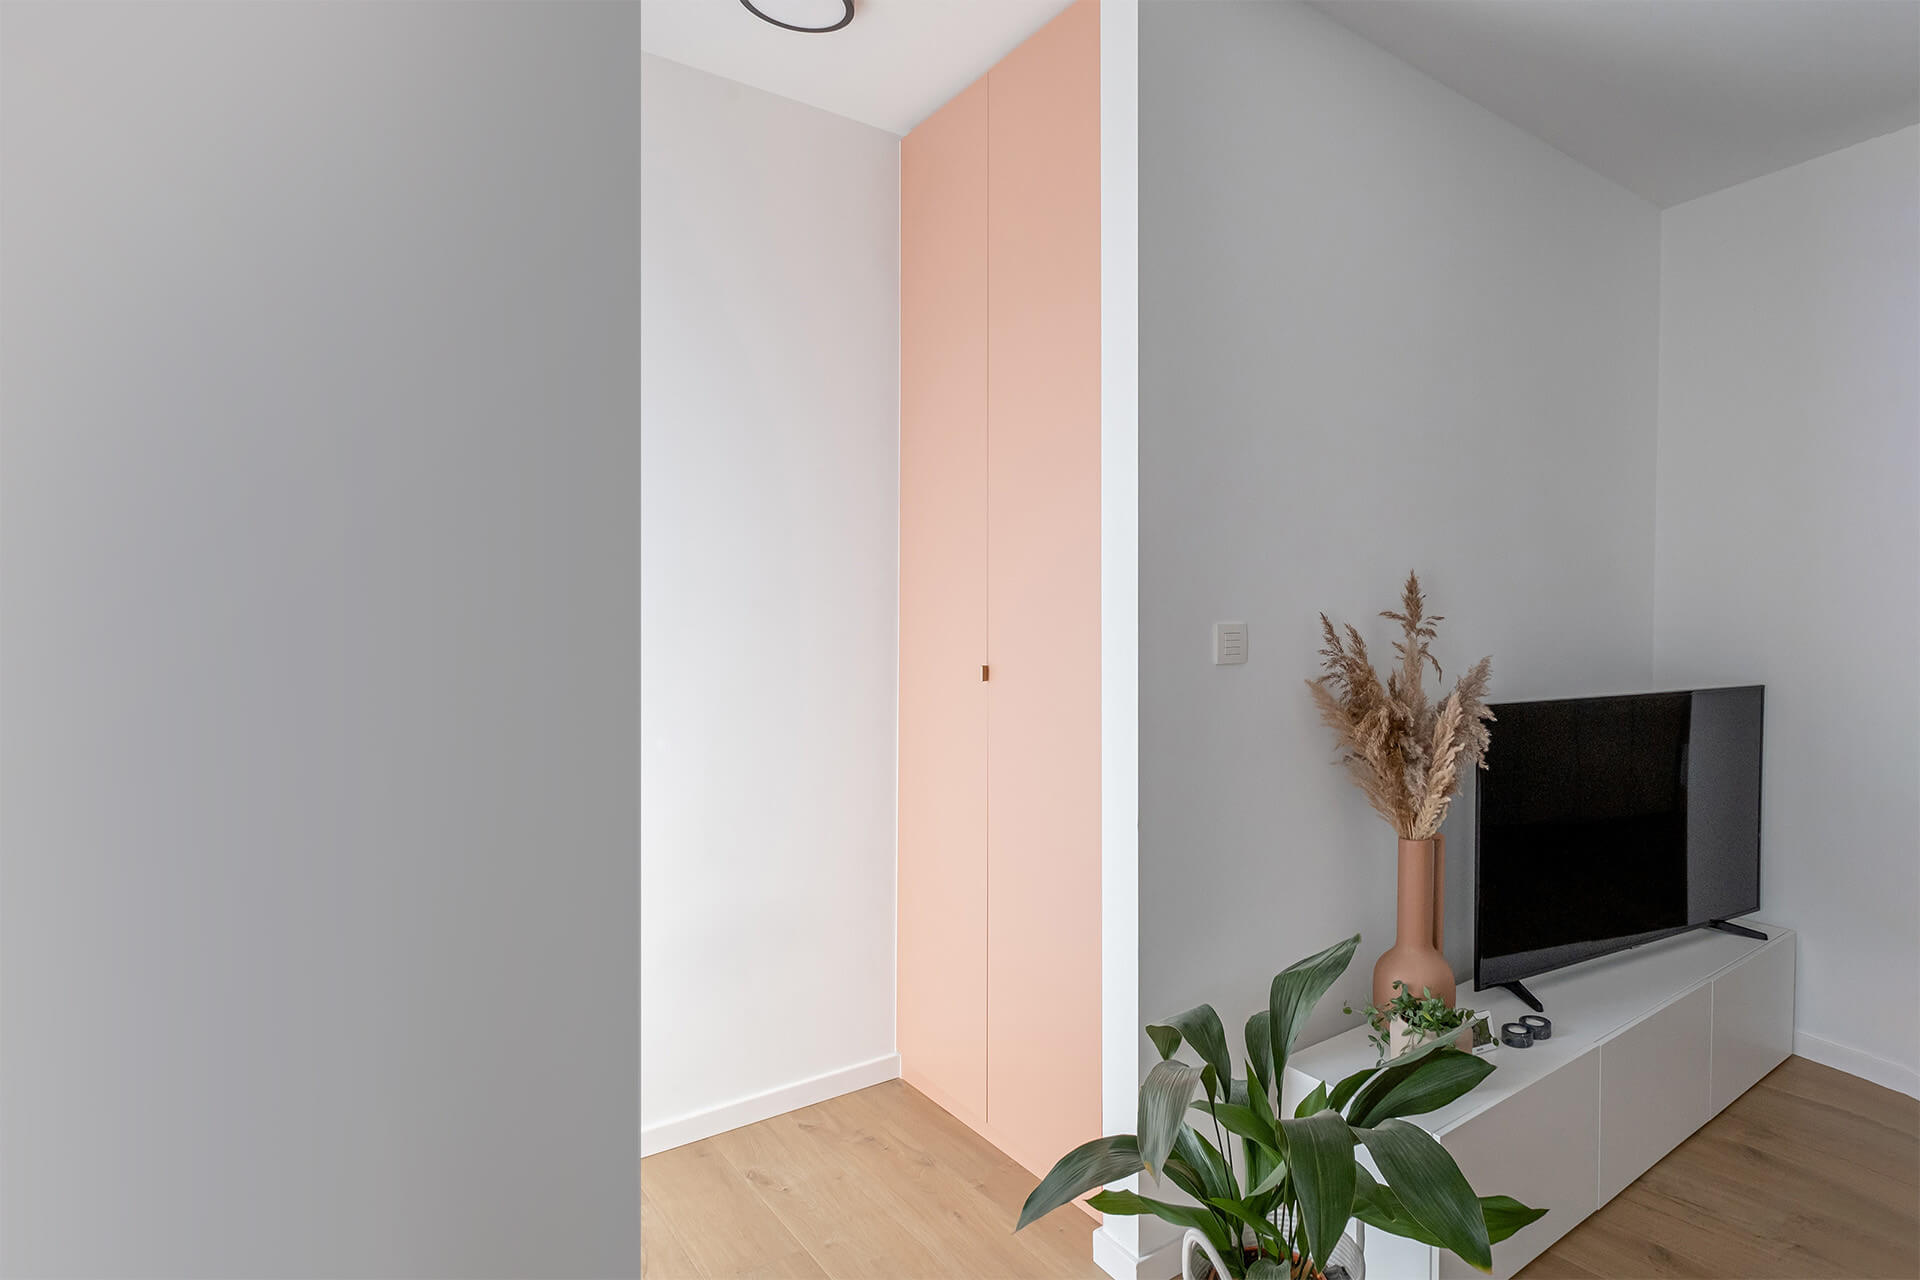 Custom-made wardrobe in the colour Dusty Coral, from maatkastenonline